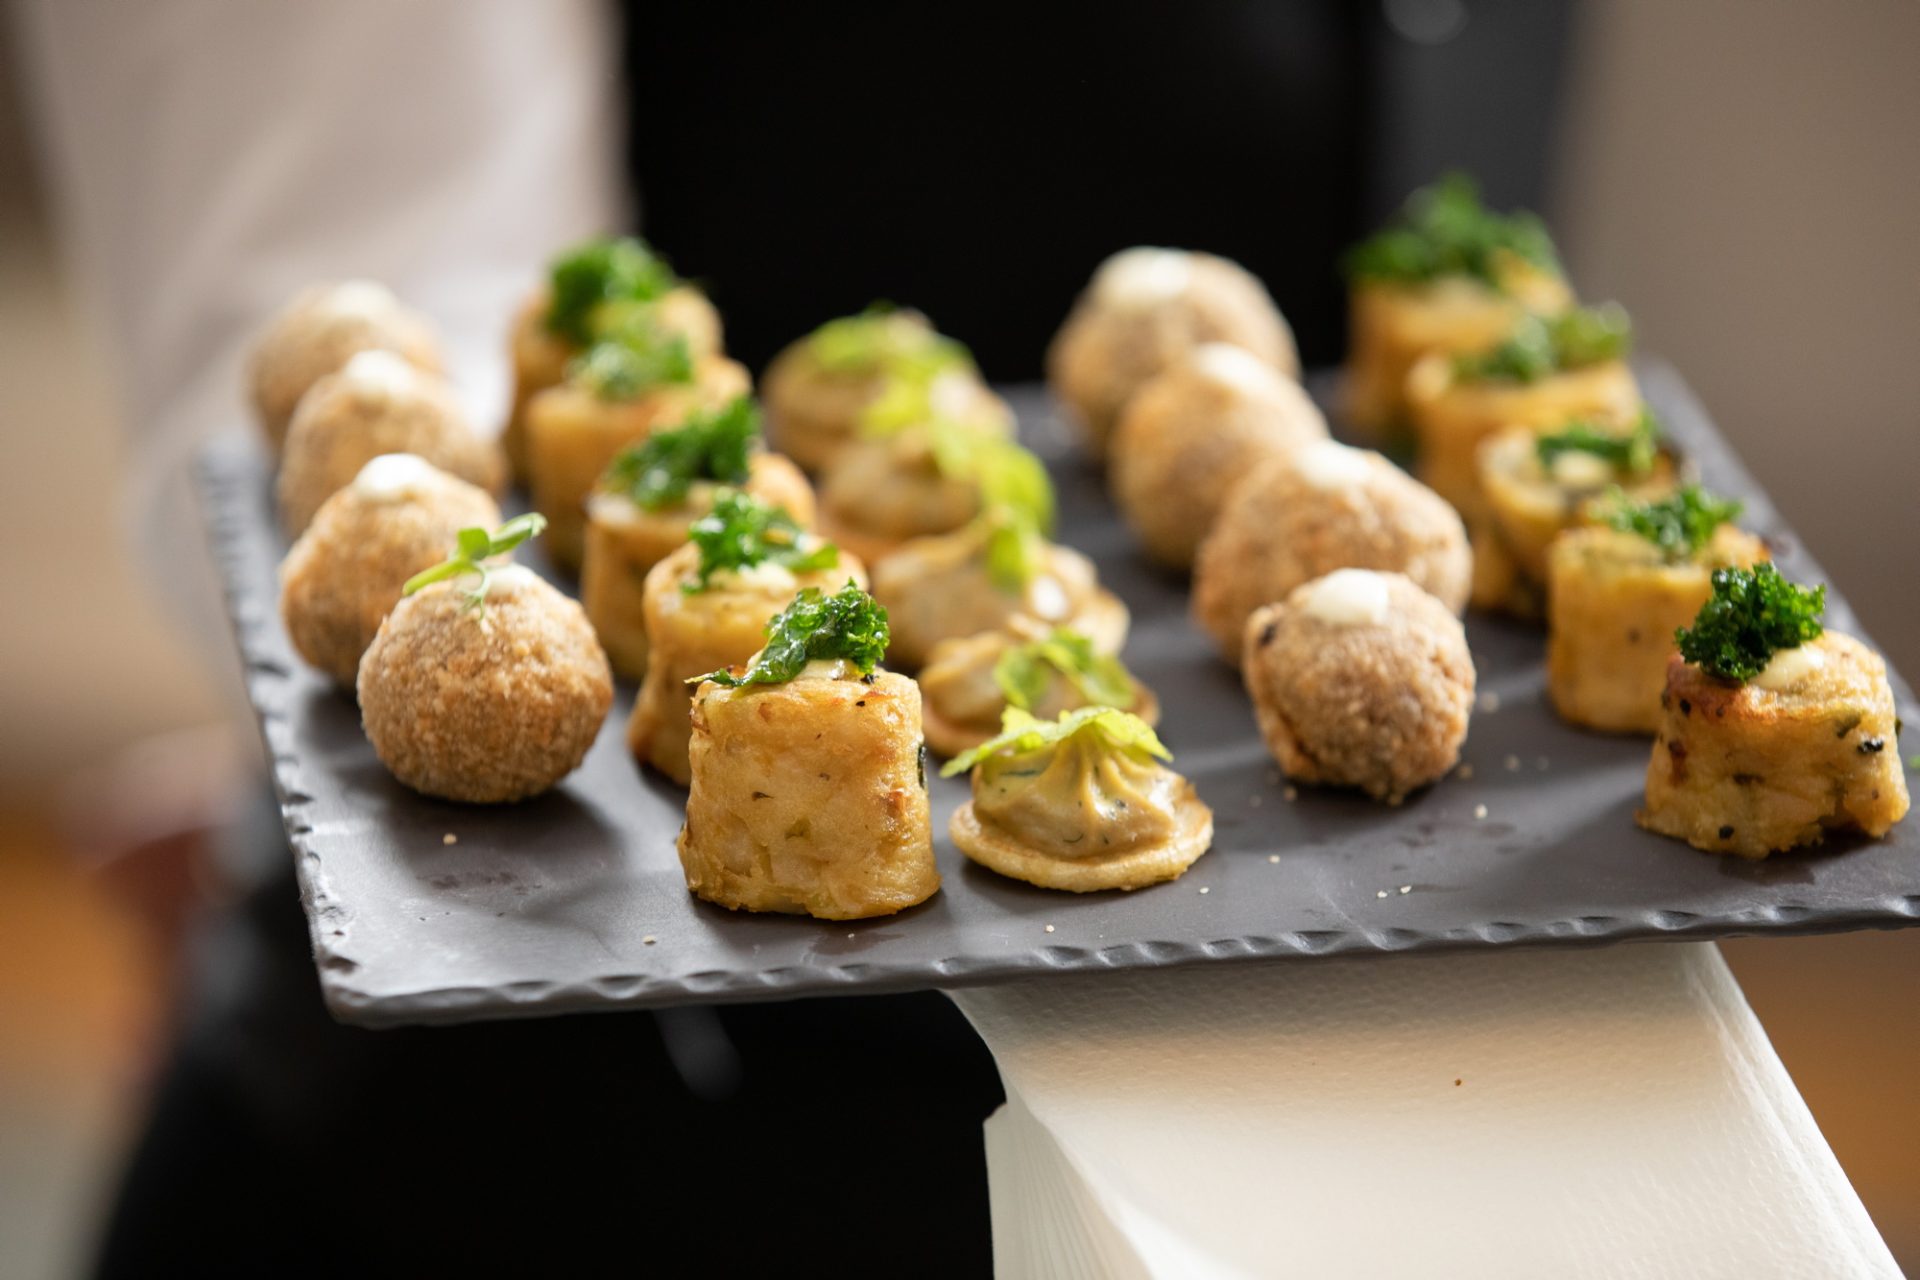 Plate of hors d'oeuvres at the Compass Group Be A Star event at the RCSI. Event & Awards Photographer Dublin